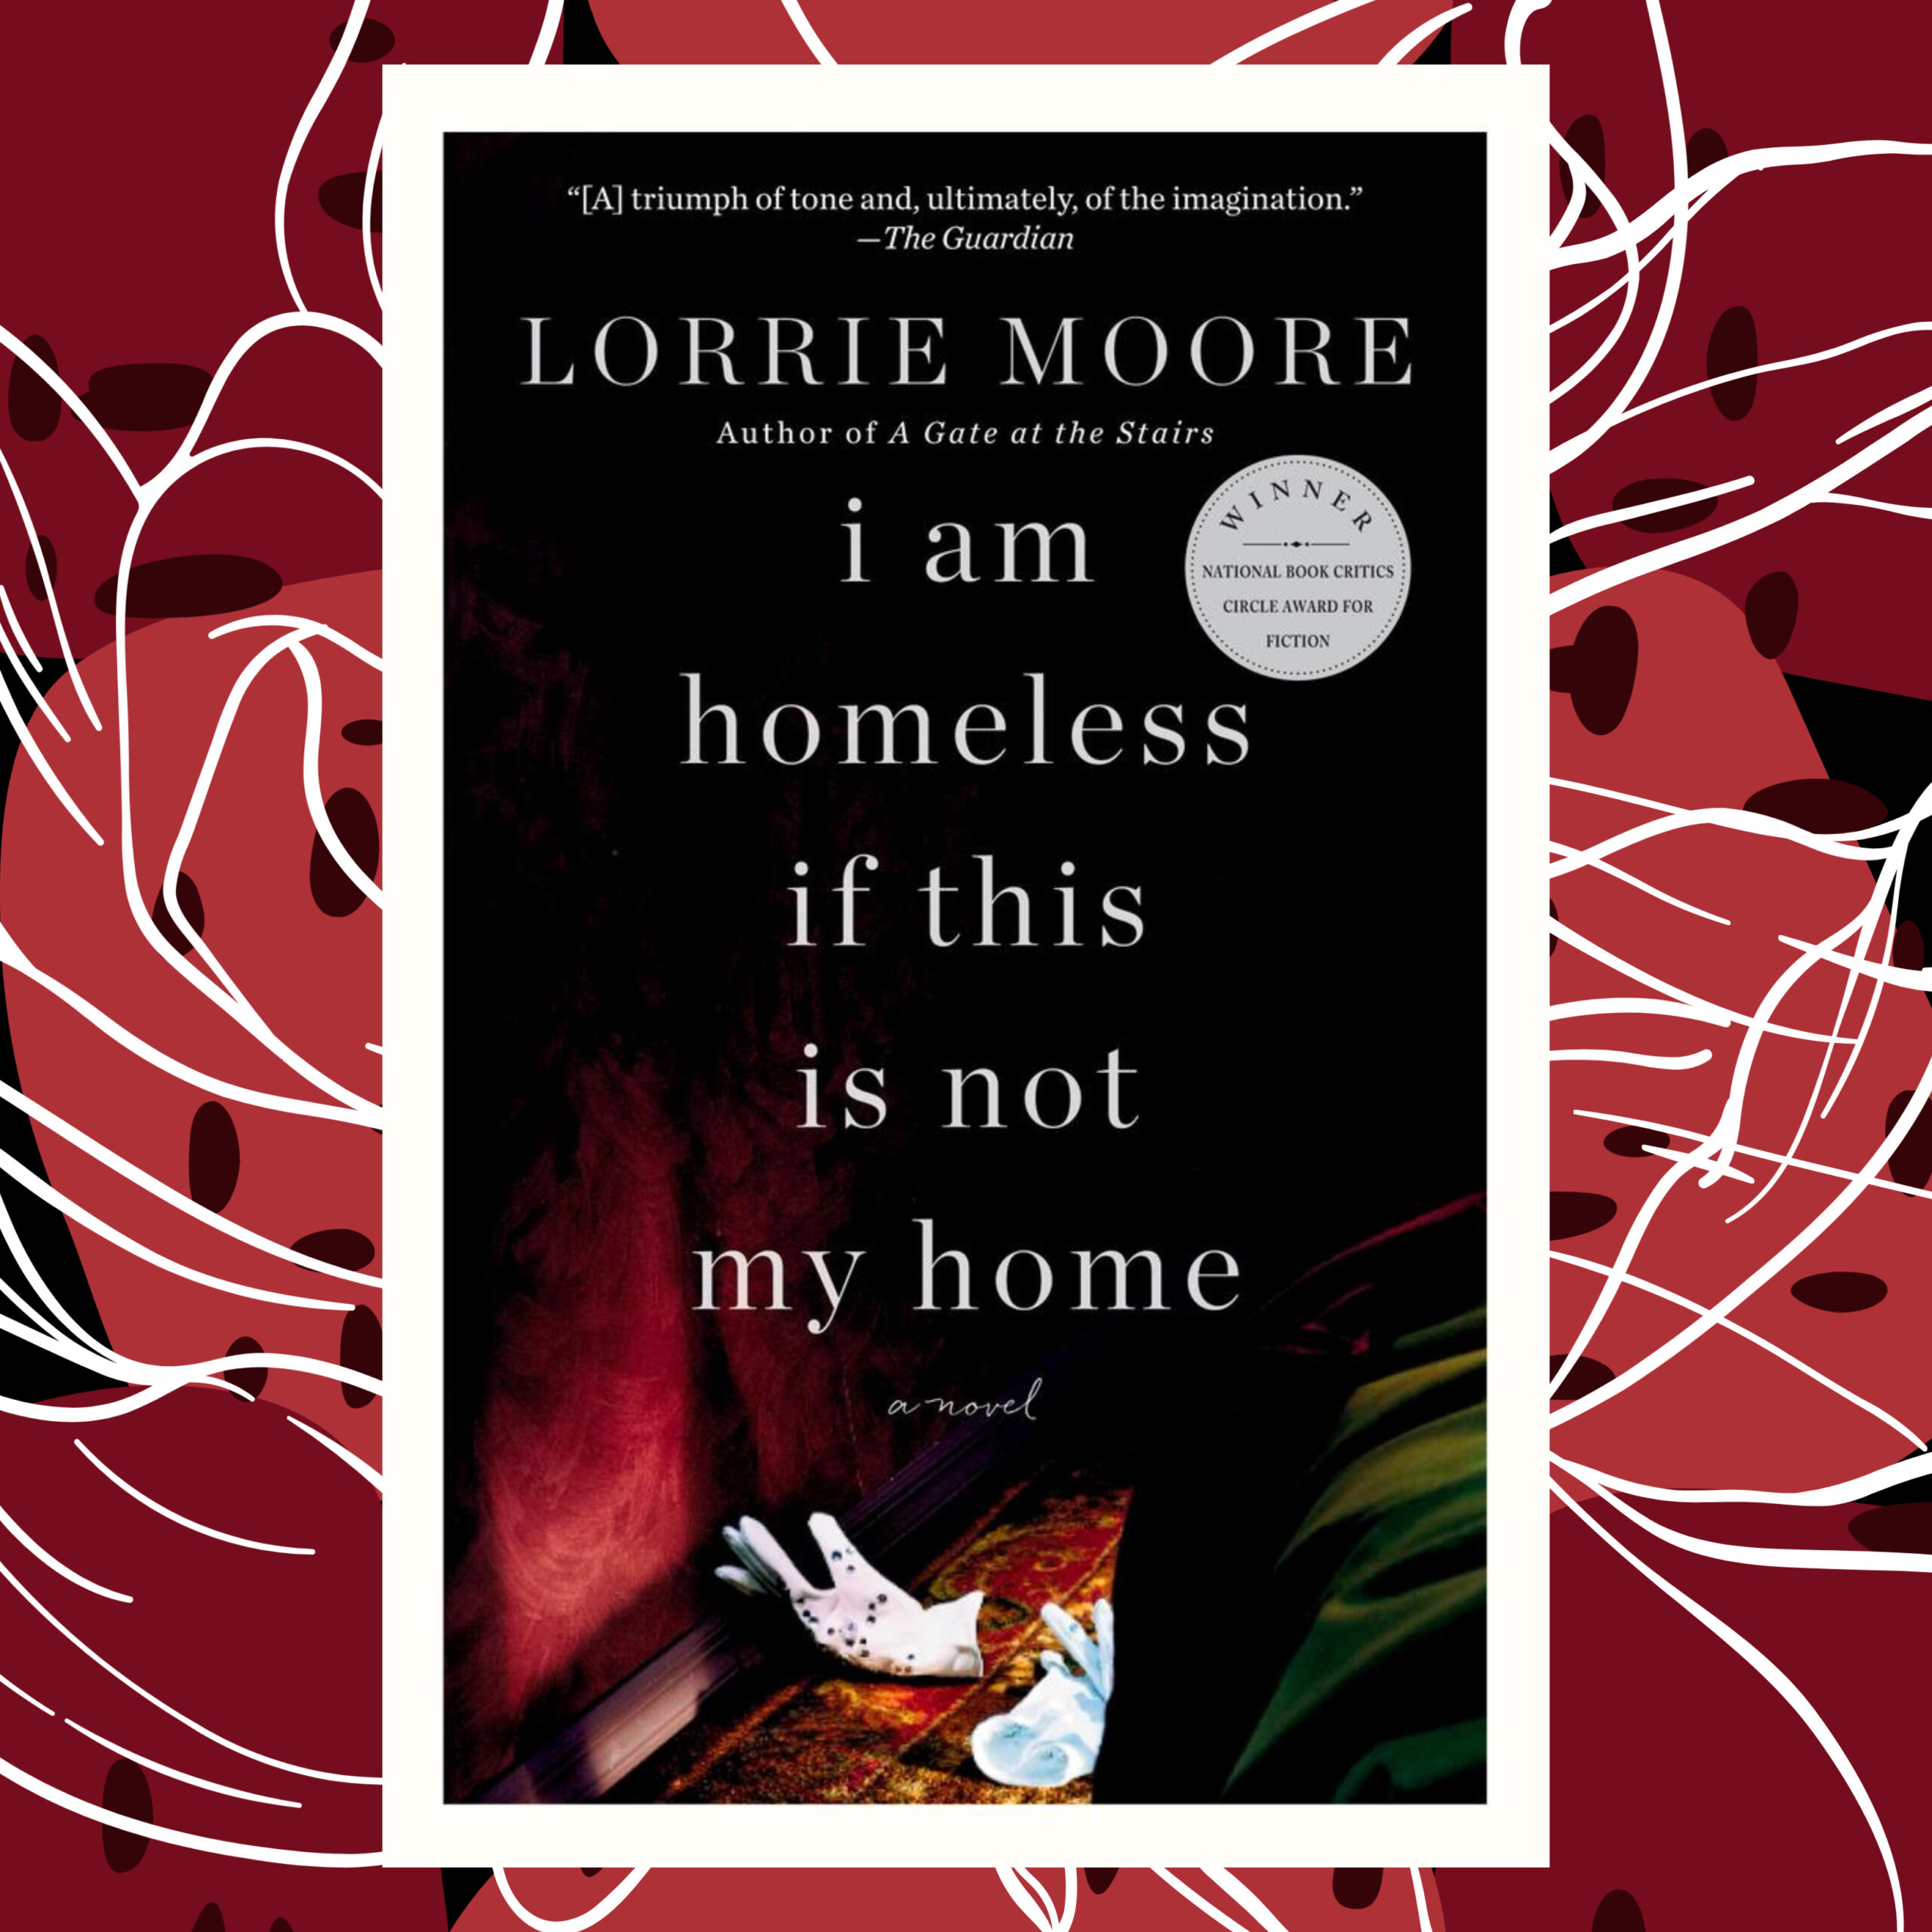 The Book Show | Lorrie Moore - I